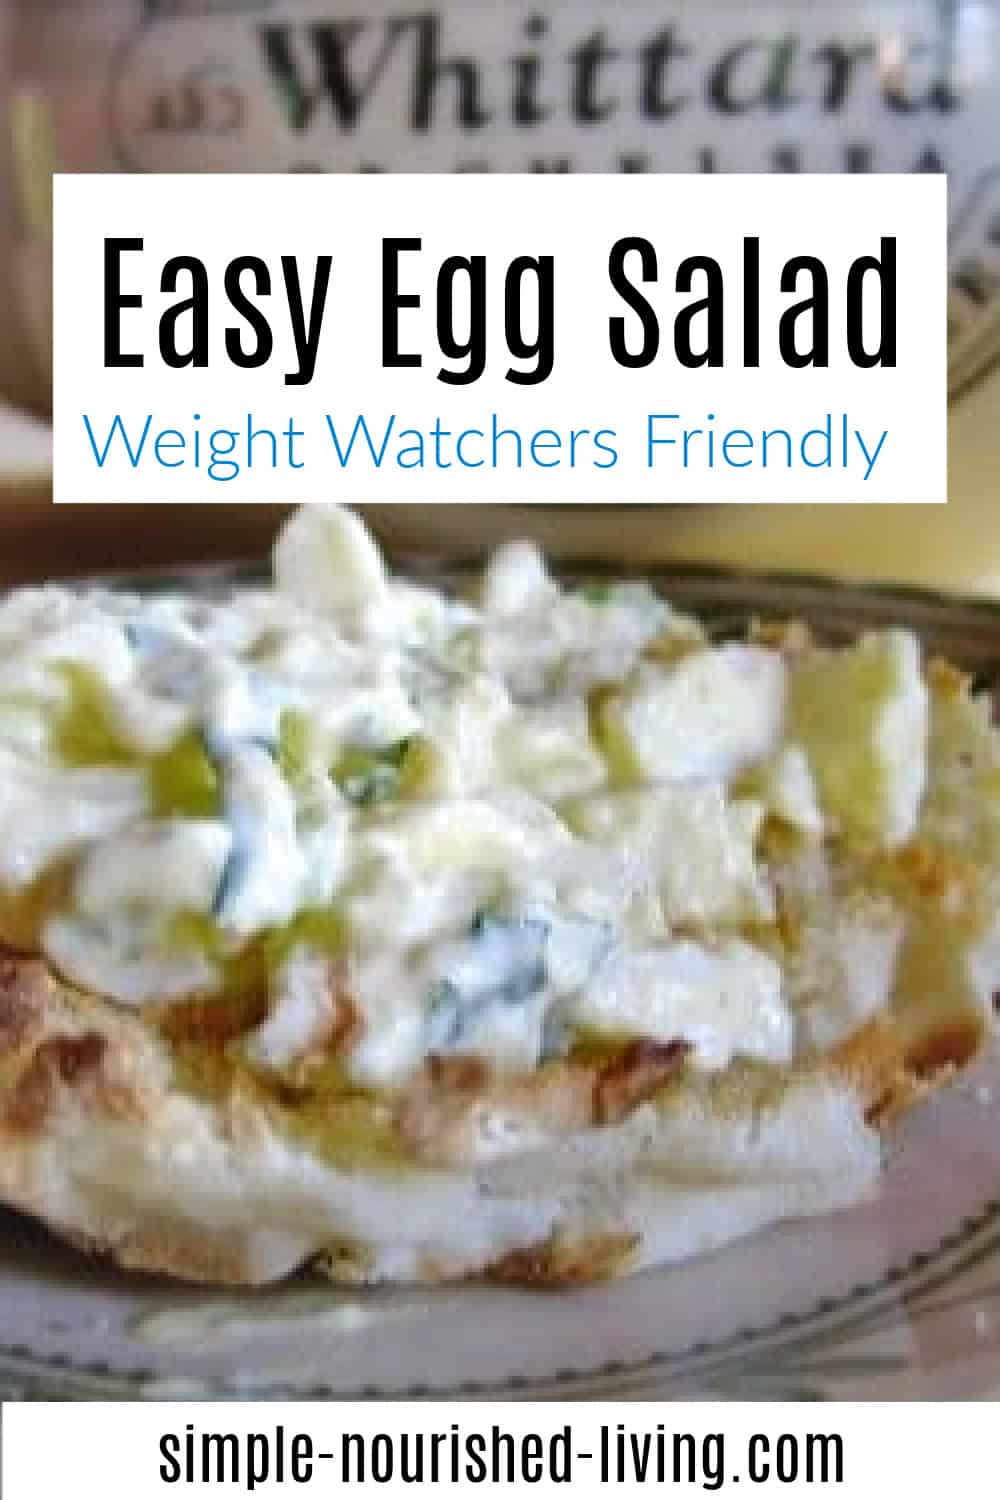 egg salad on english muffin with Whittard tea pot behind with Text Box Easy Egg Salad - Weight Watchers Friendly.